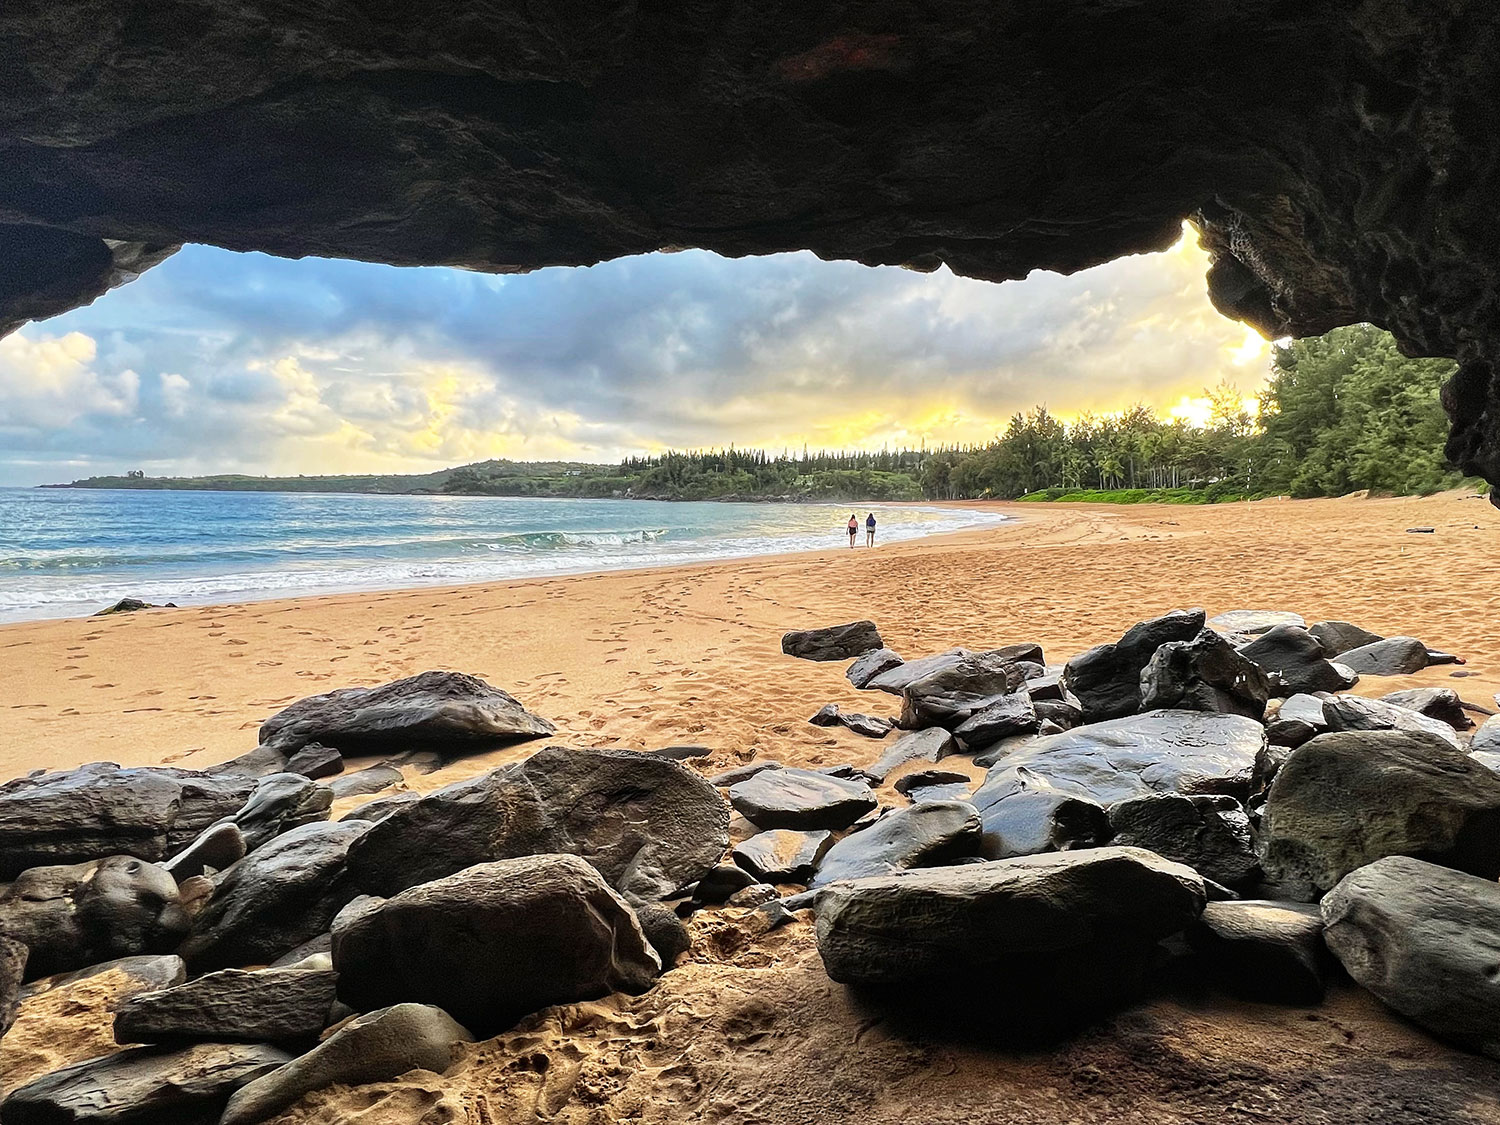 A secluded cove near the beach located next to The Ritz-Carlton Maui, Kapalua, in Hawaii.